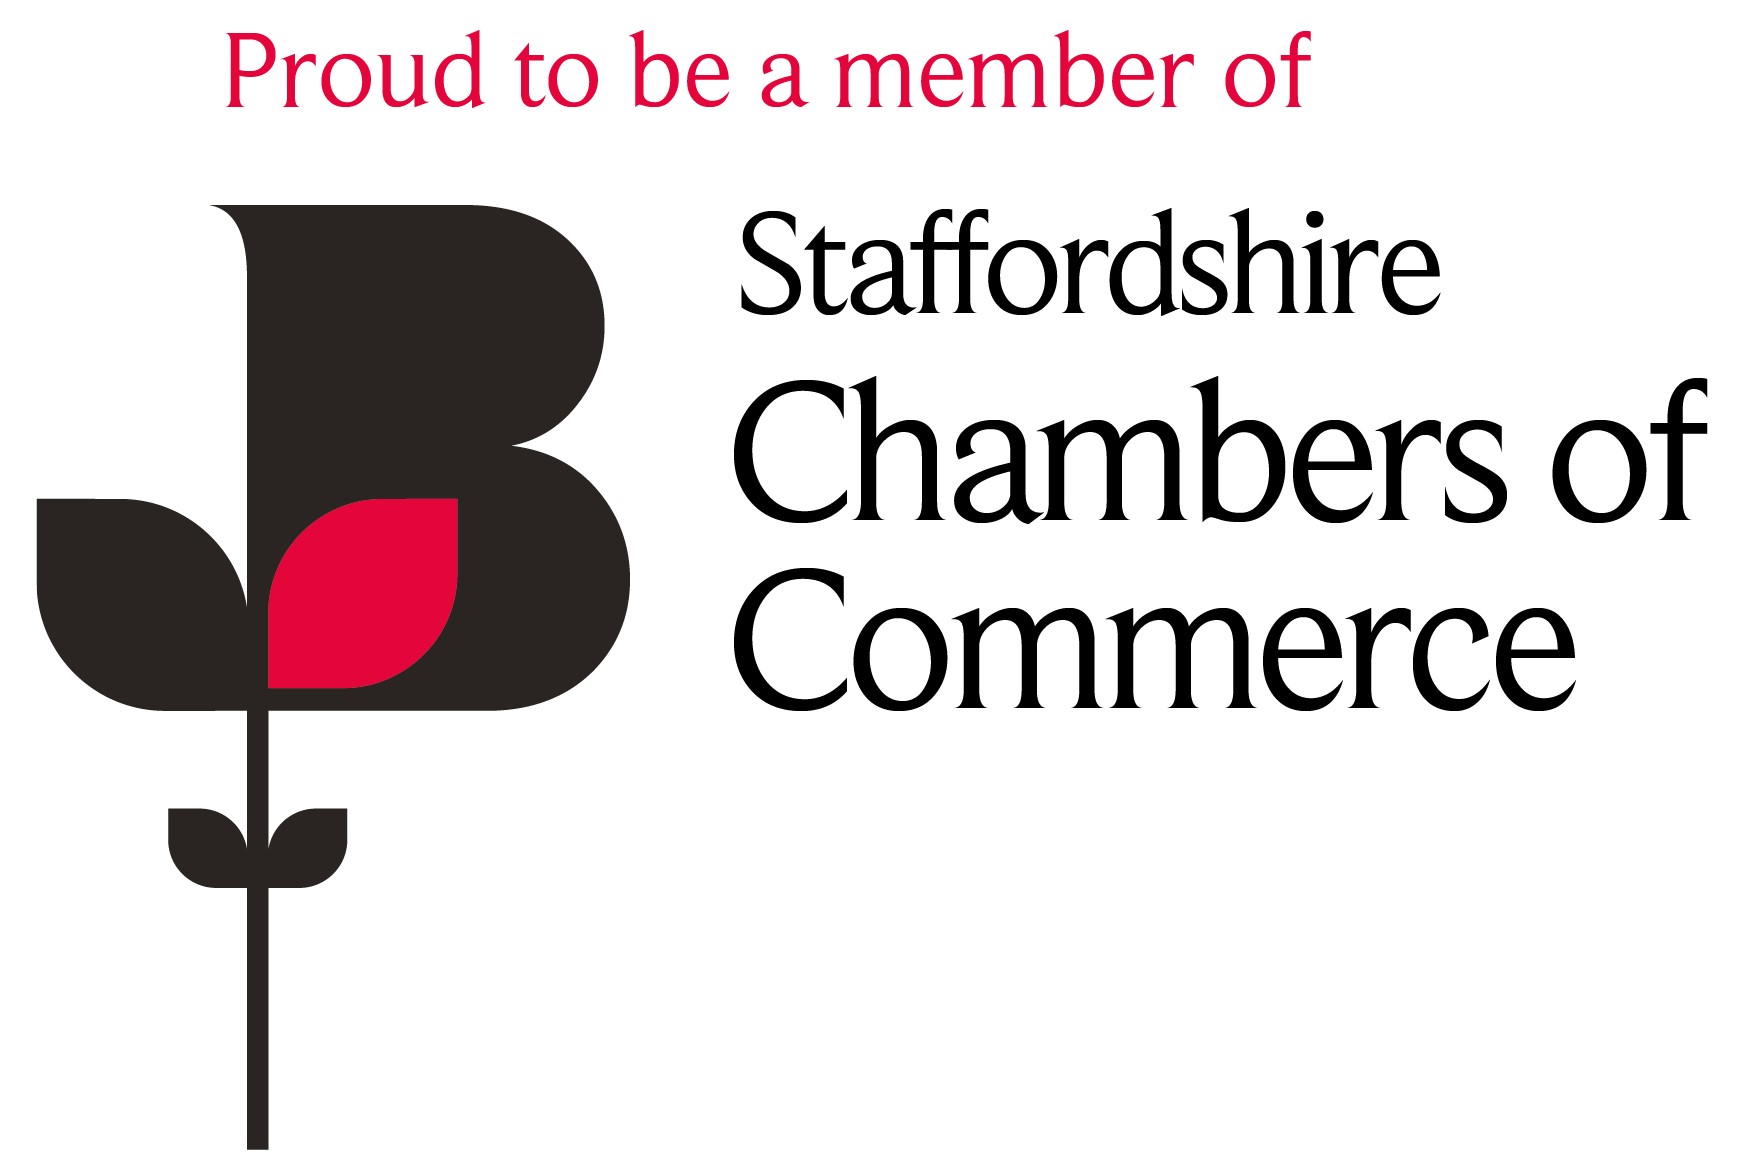 Saffordshire Chamber of Commerce